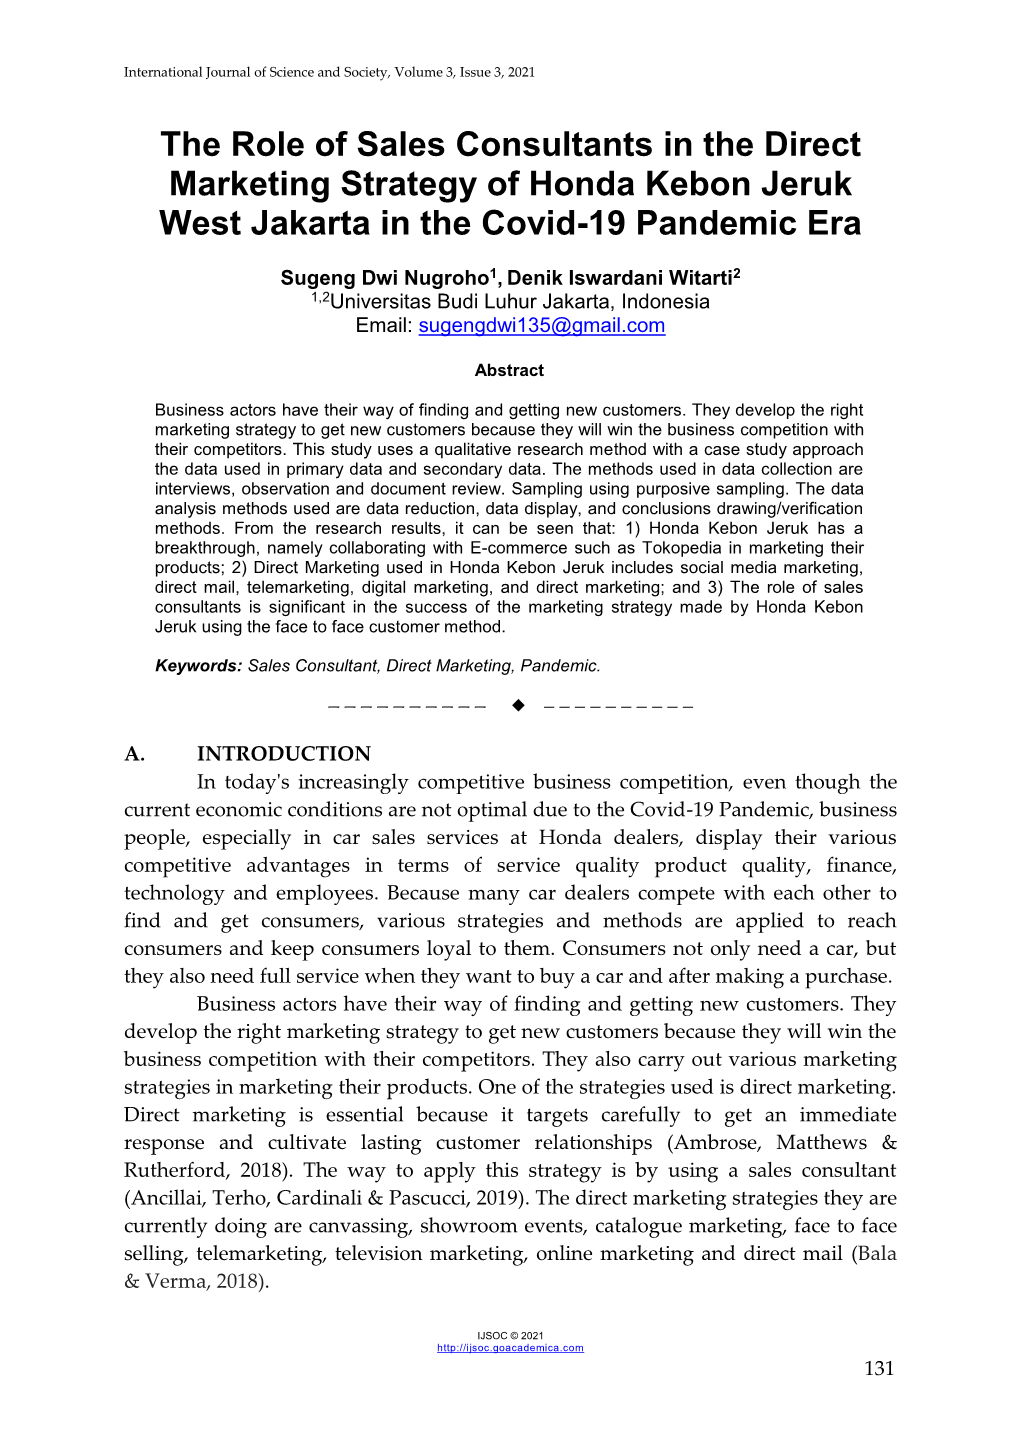 The Role of Sales Consultants in the Direct Marketing Strategy of Honda Kebon Jeruk West Jakarta in the Covid-19 Pandemic Era